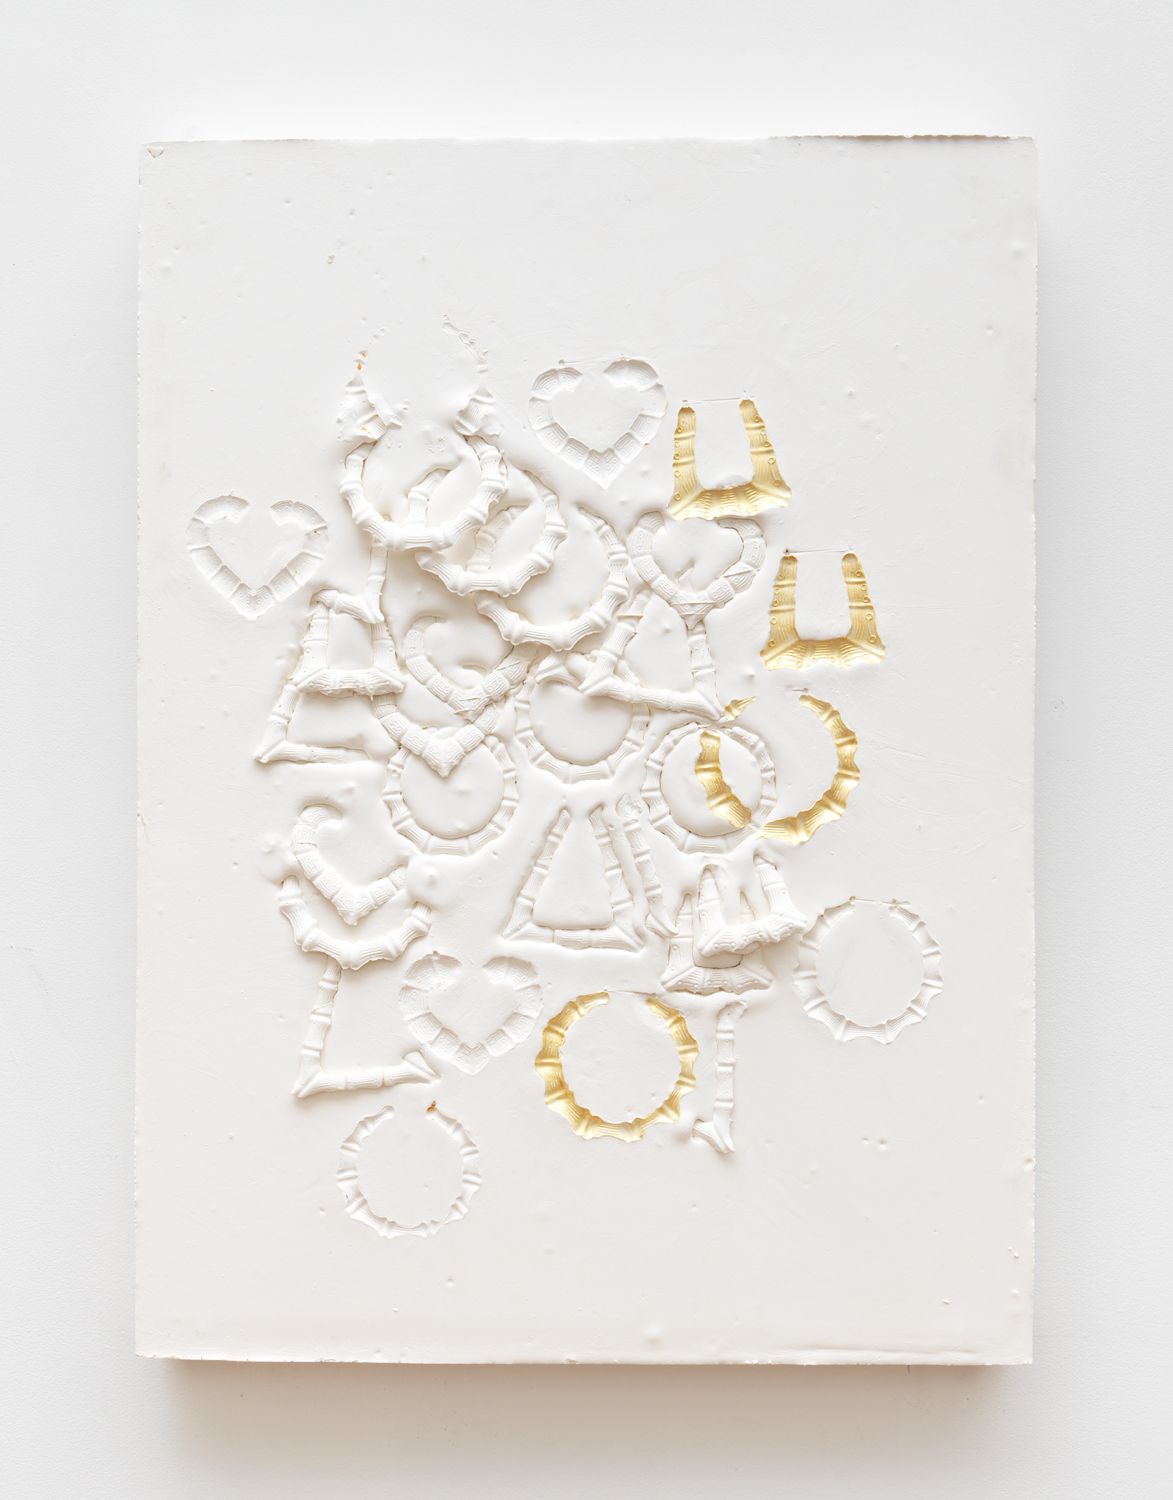 LaKela Brown, Composition with, round earrings, heart earrings and bamboo earrings, 2019, plaster and acrylic,  29 x 21 1⁄2 x 3 in. (73.66 x 54.61 x 7.62 cm) 